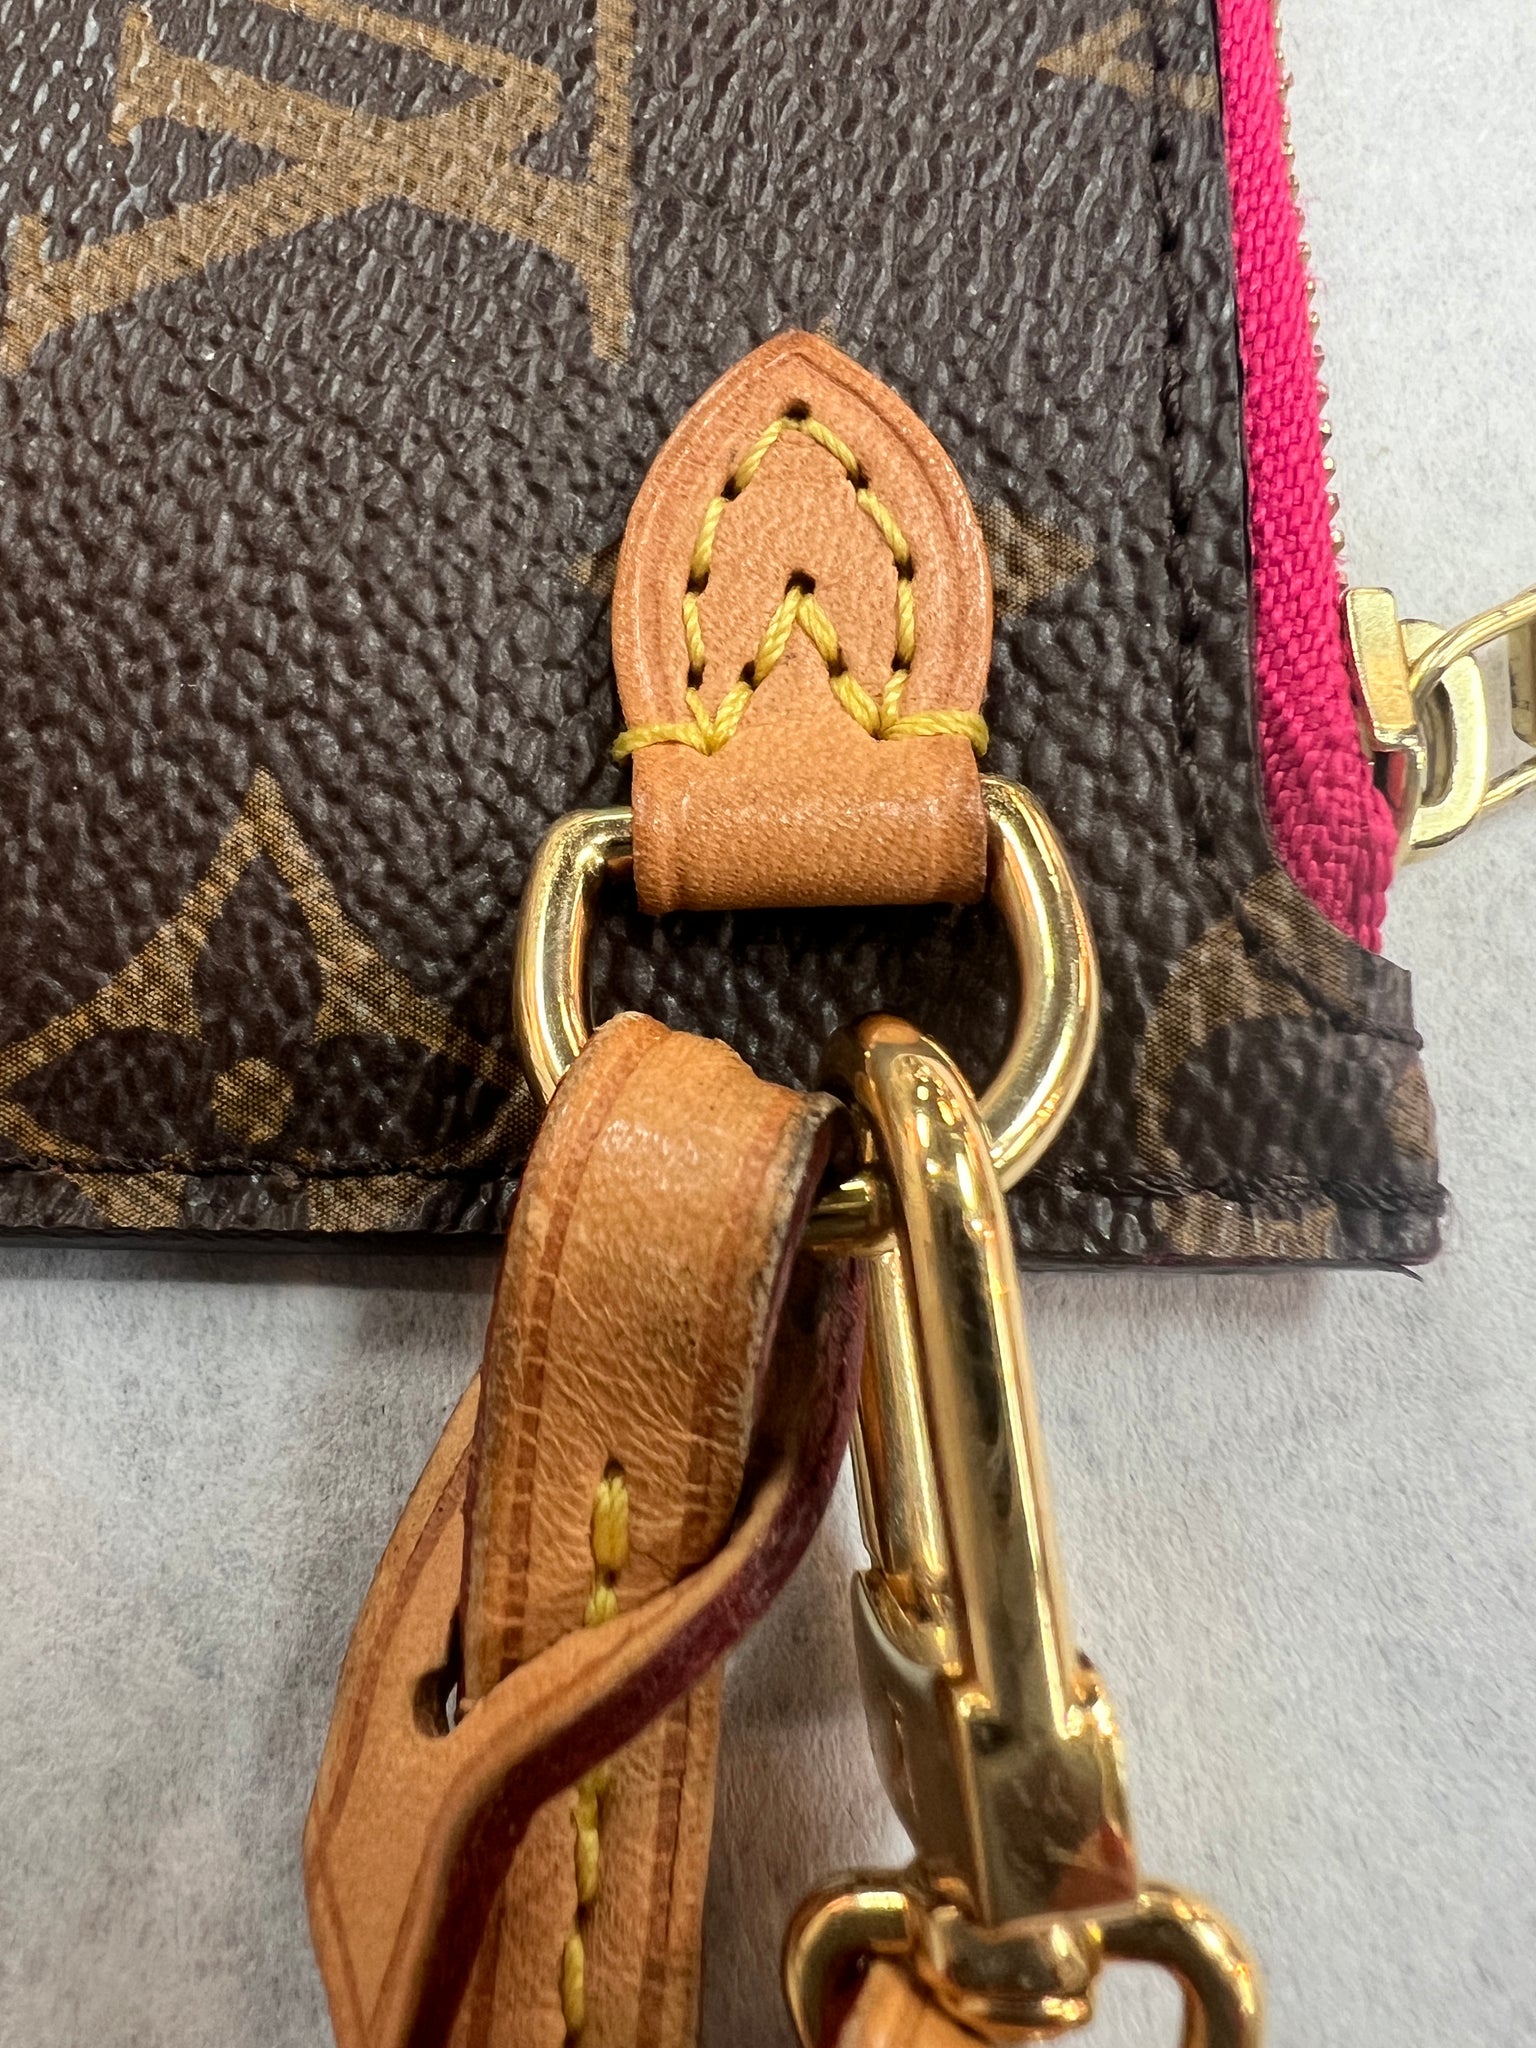 Authentic Louis Vuitton MM/GM Neverfull Pouch – Relics to Rhinestones